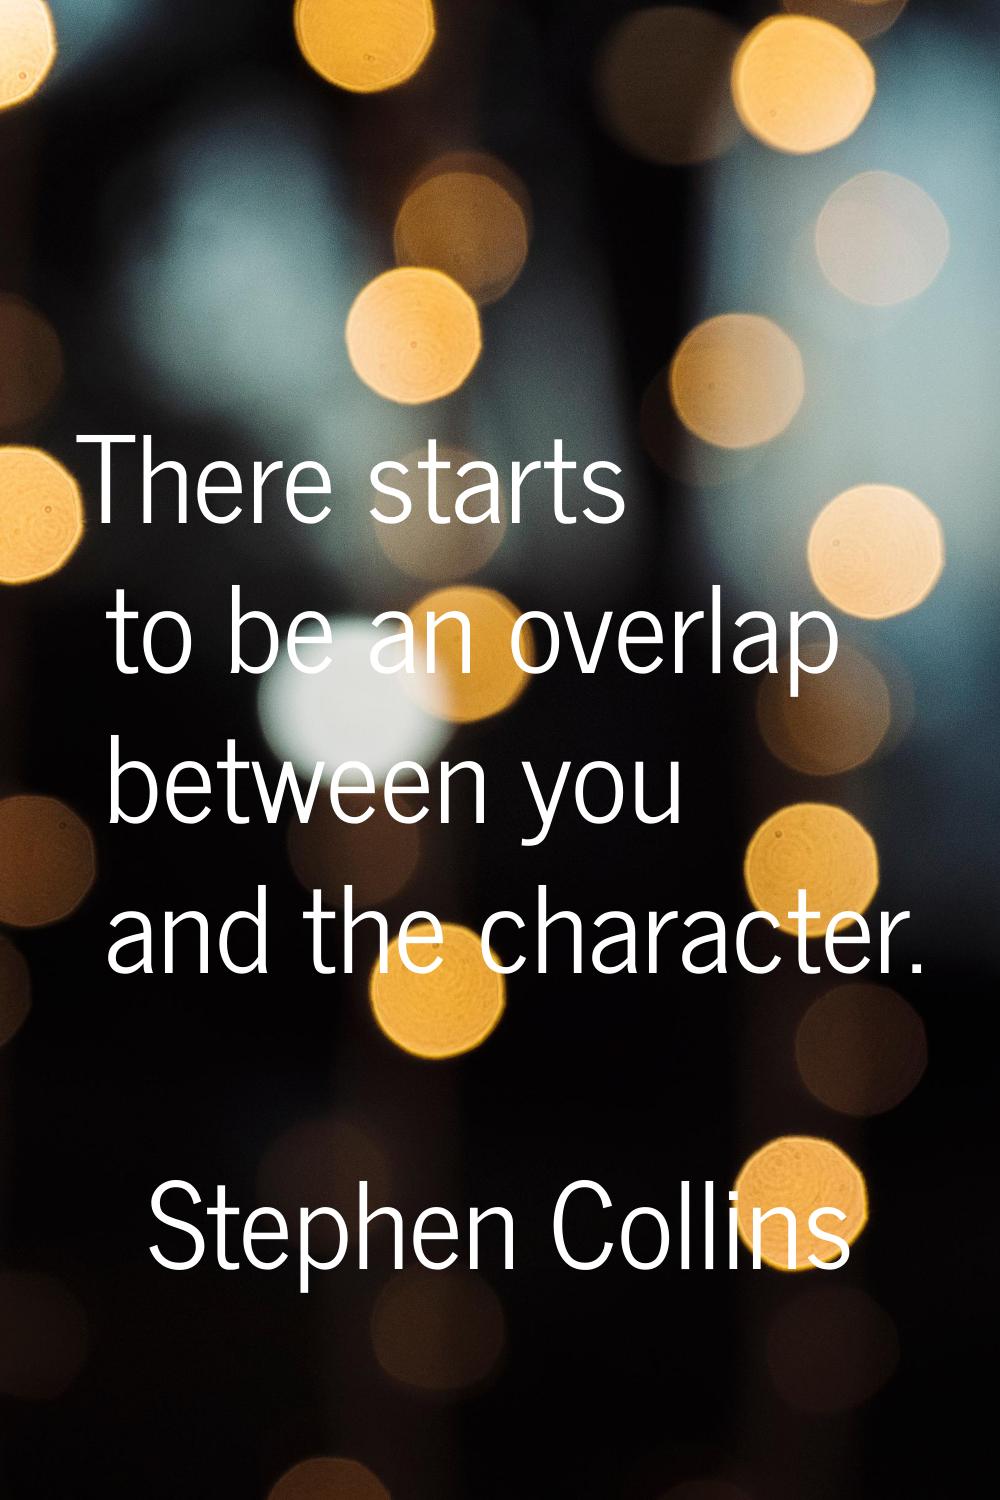 There starts to be an overlap between you and the character.